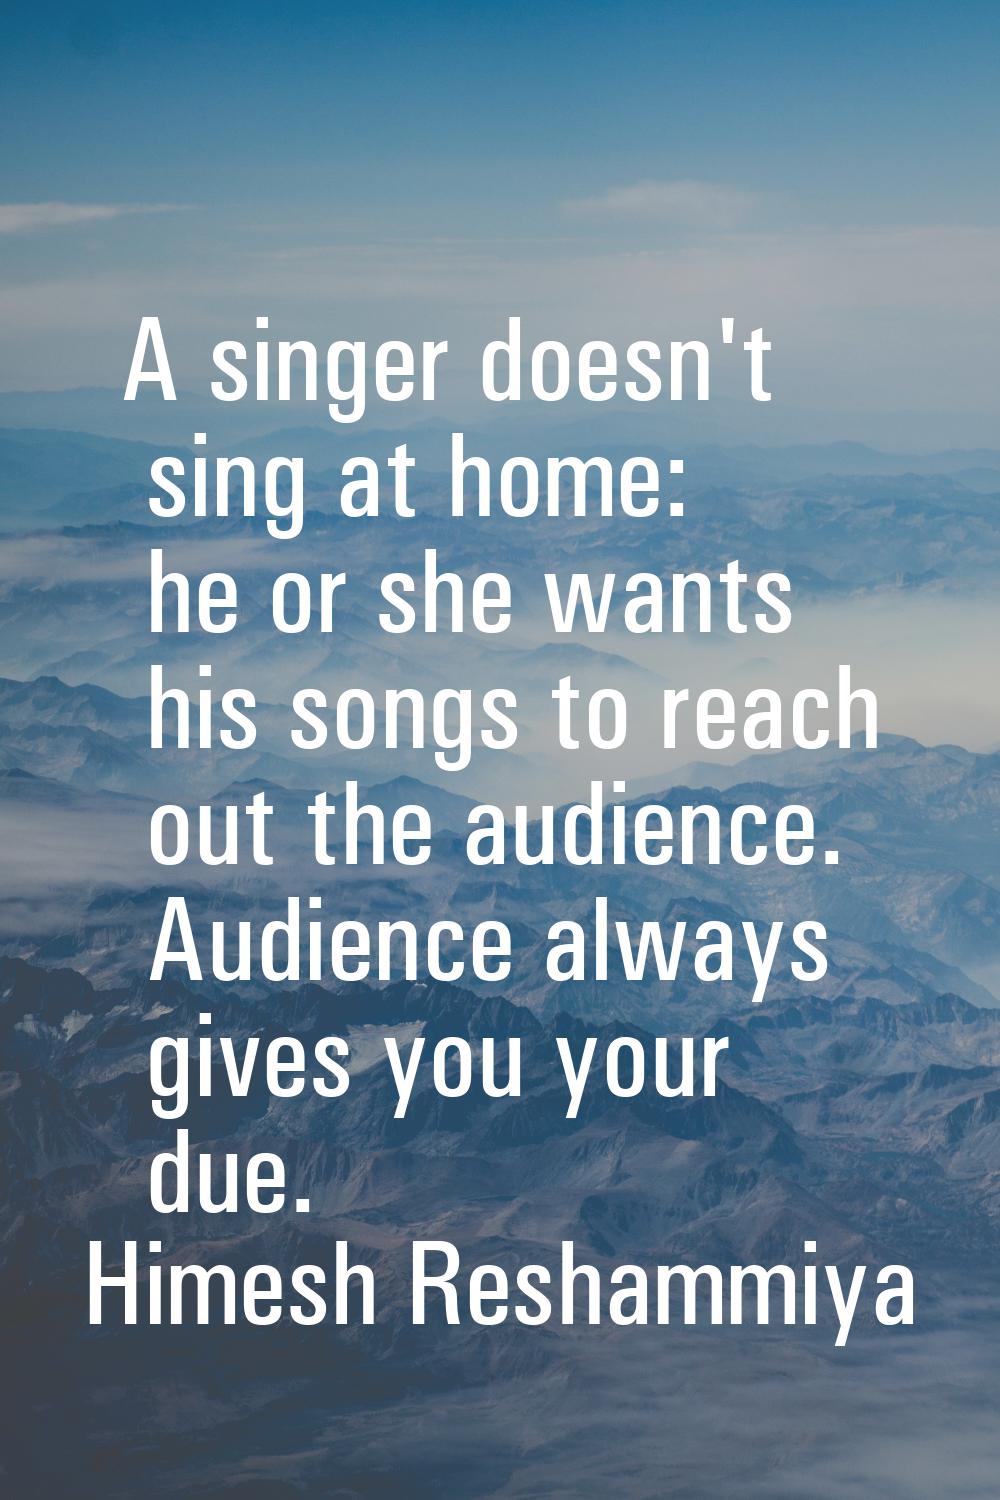 A singer doesn't sing at home: he or she wants his songs to reach out the audience. Audience always